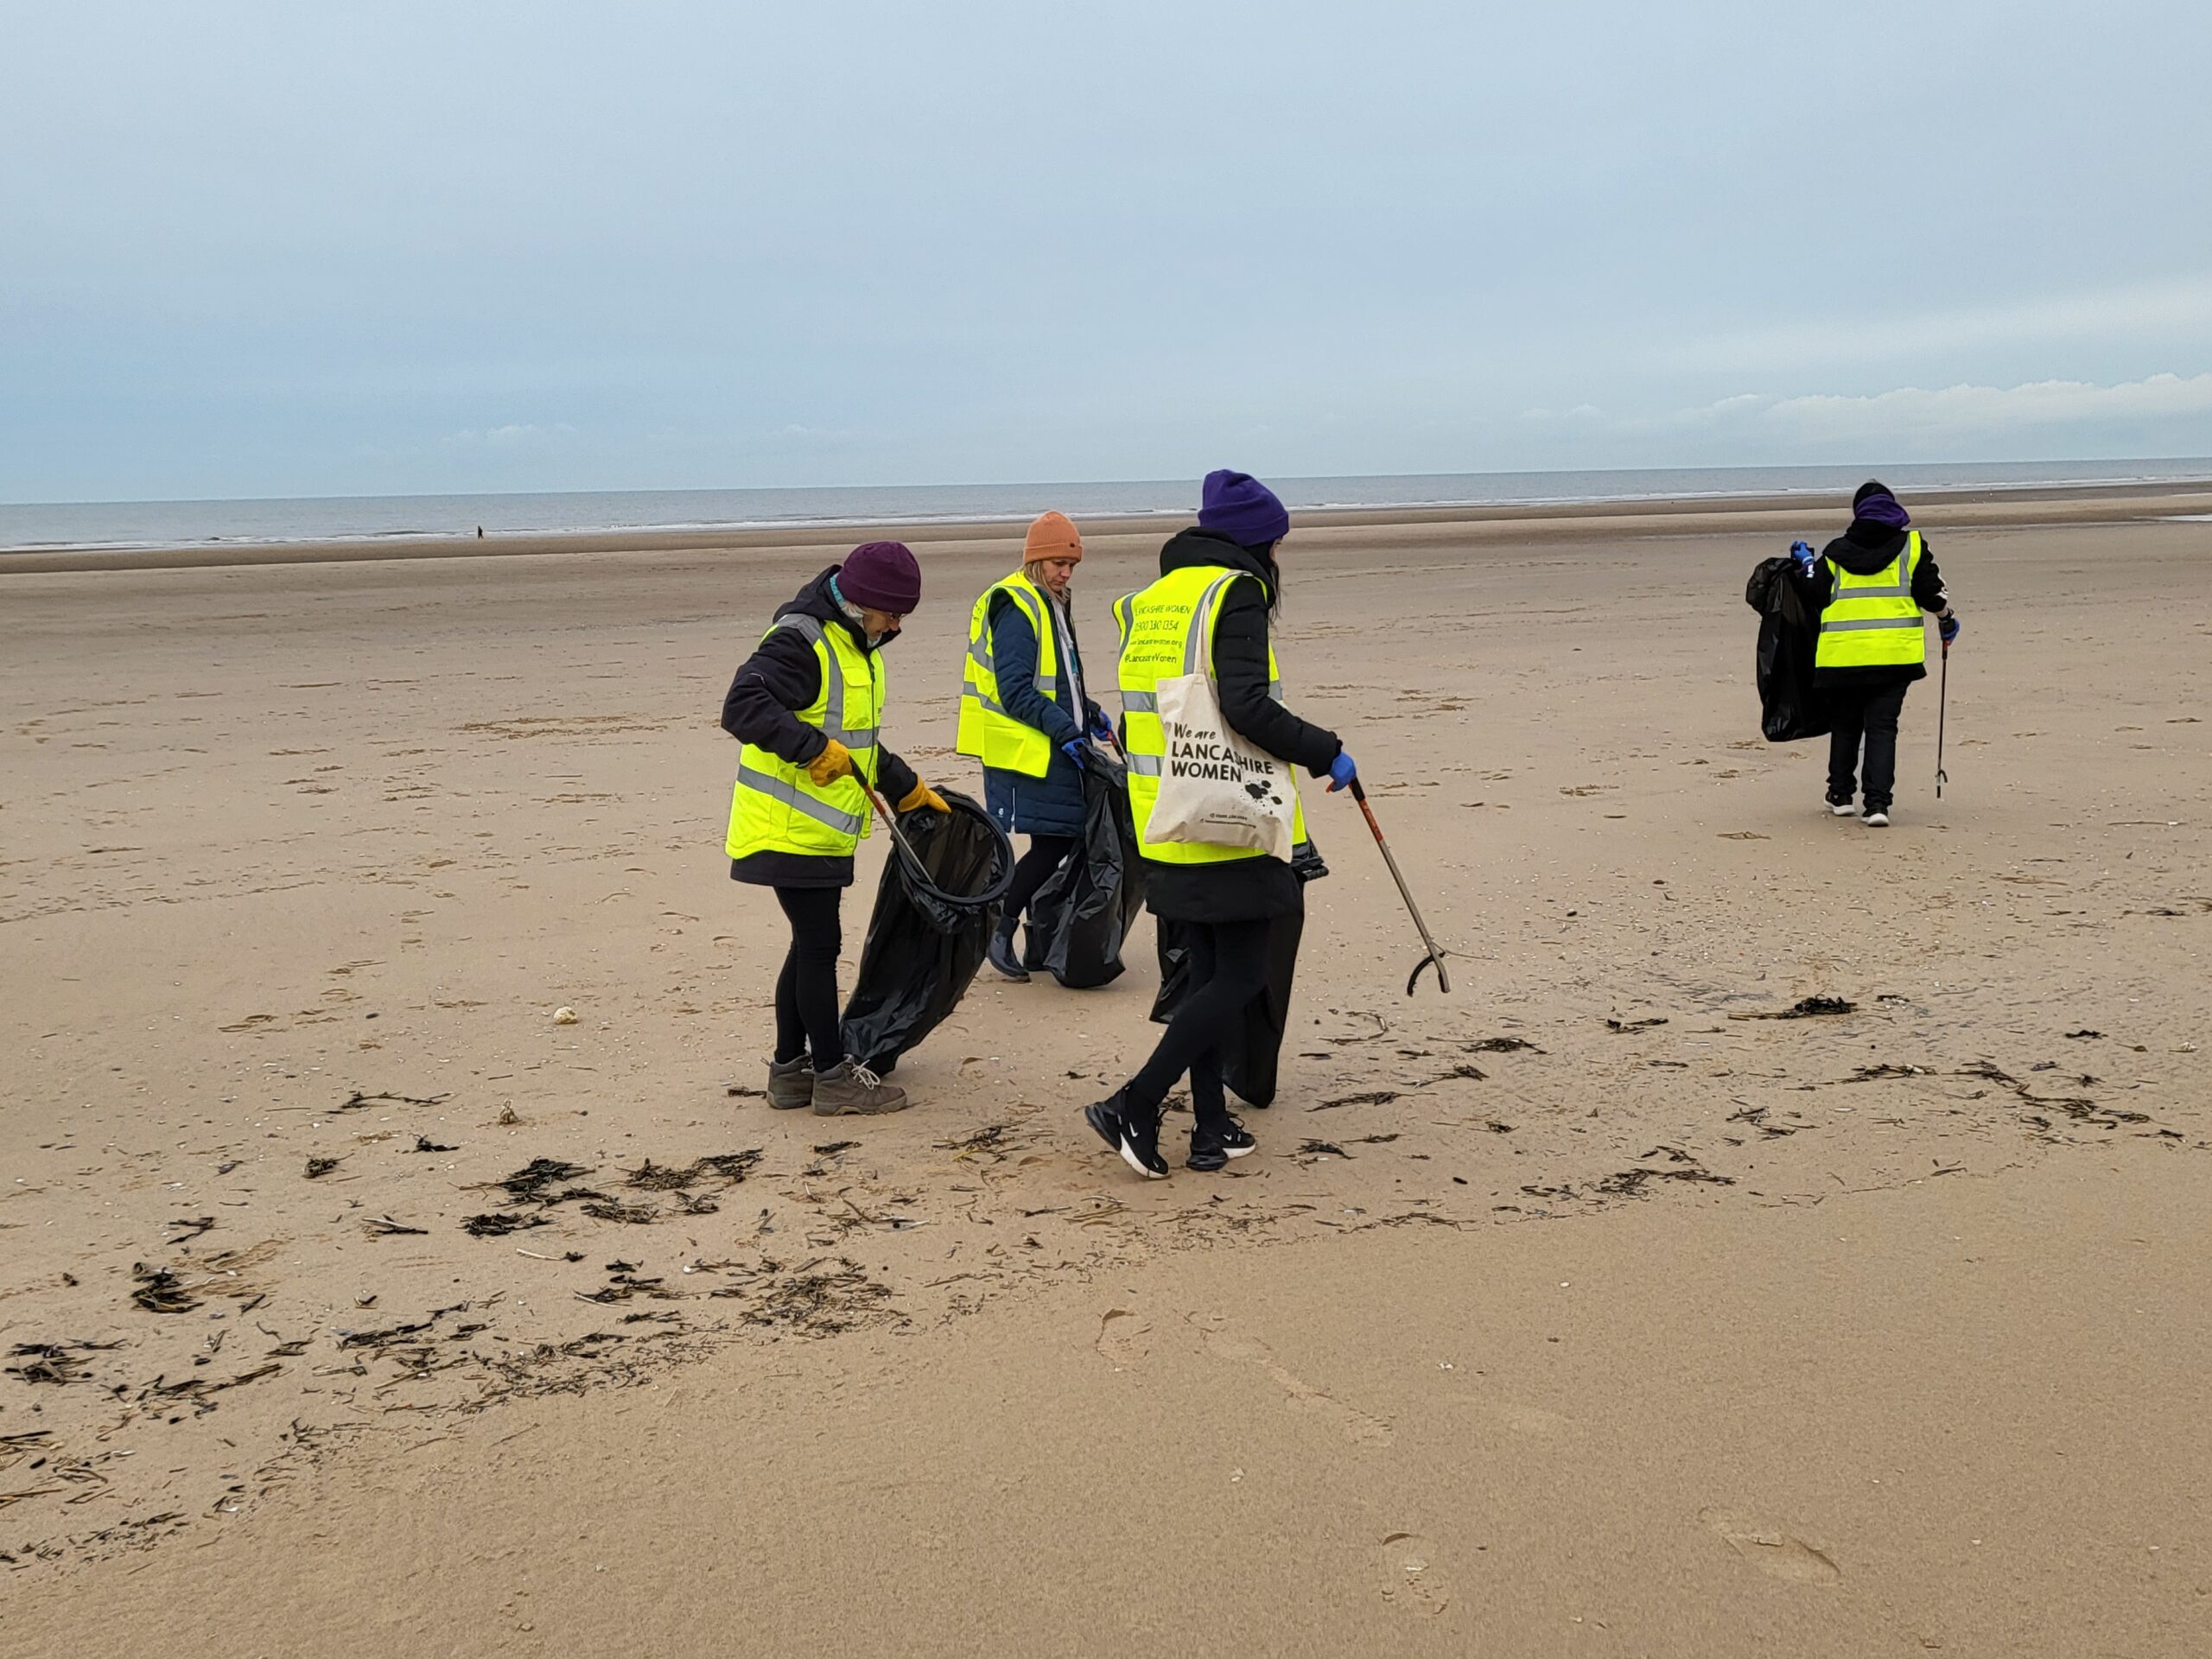 Enveco host litter picking events with Lancashire Women, image of 4 women on Blackpool Beach litter picking.